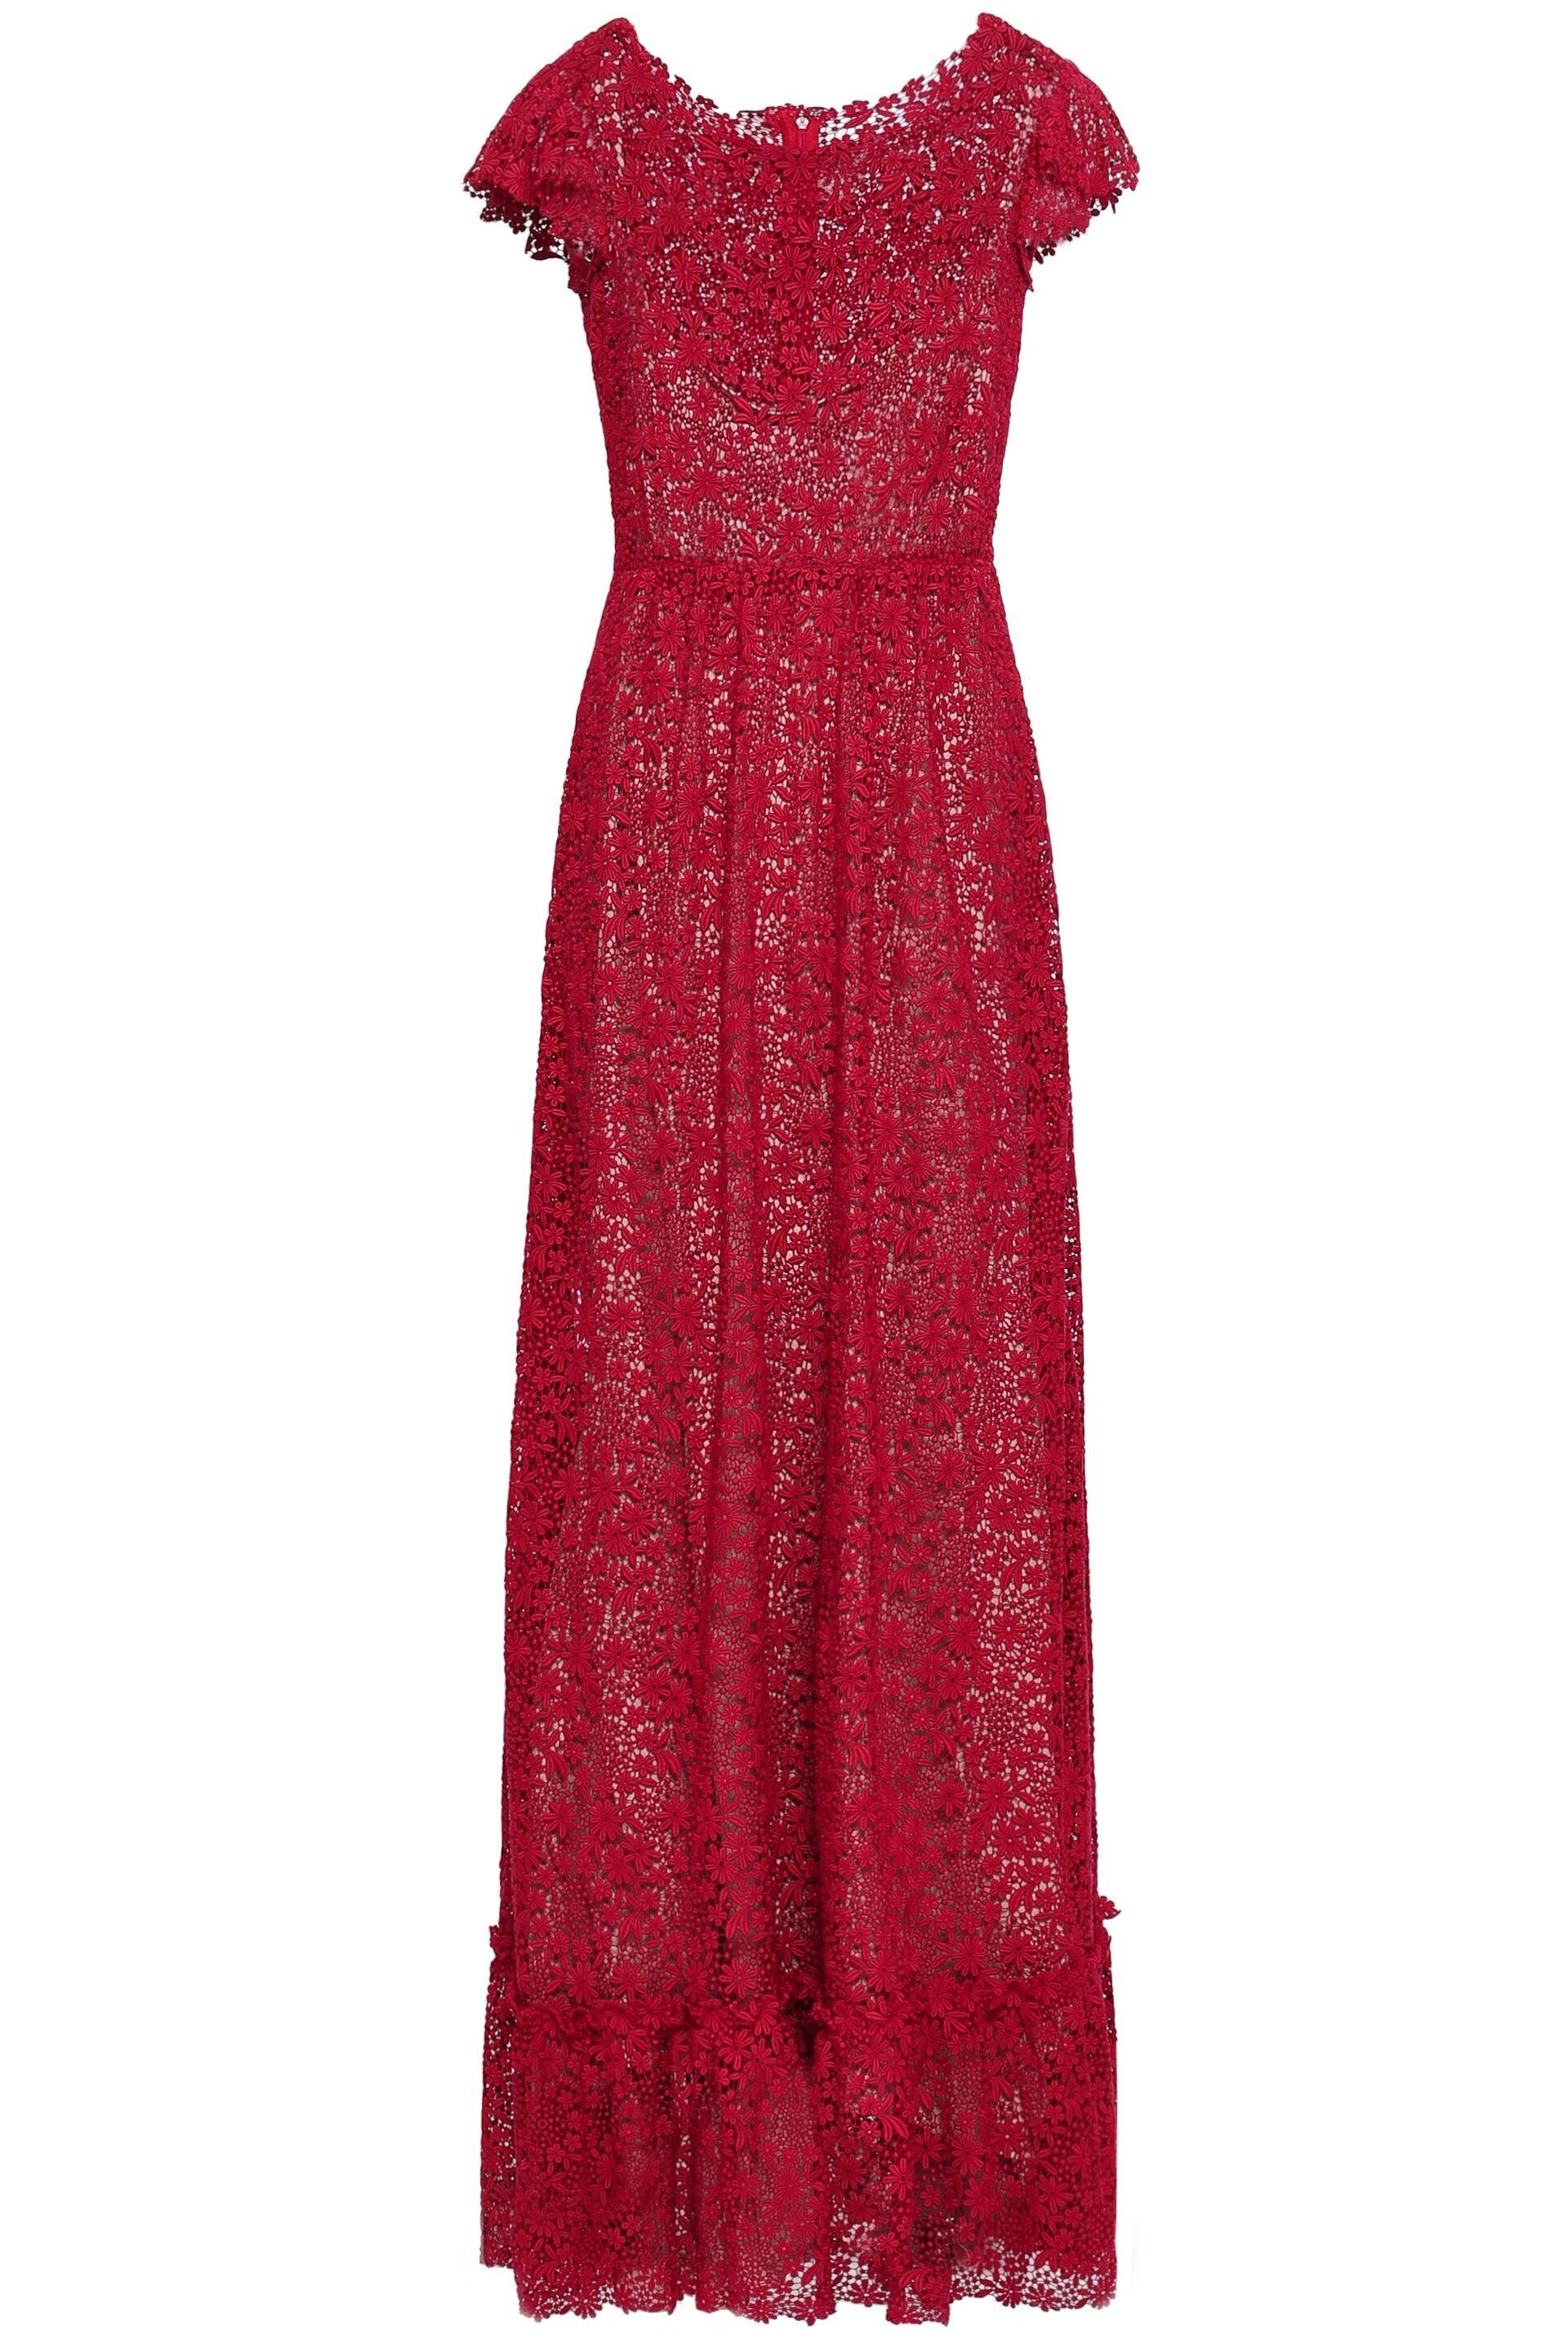 Valentino Fluted Cotton-Blend Guipure Lace Gown in Claret.jpg